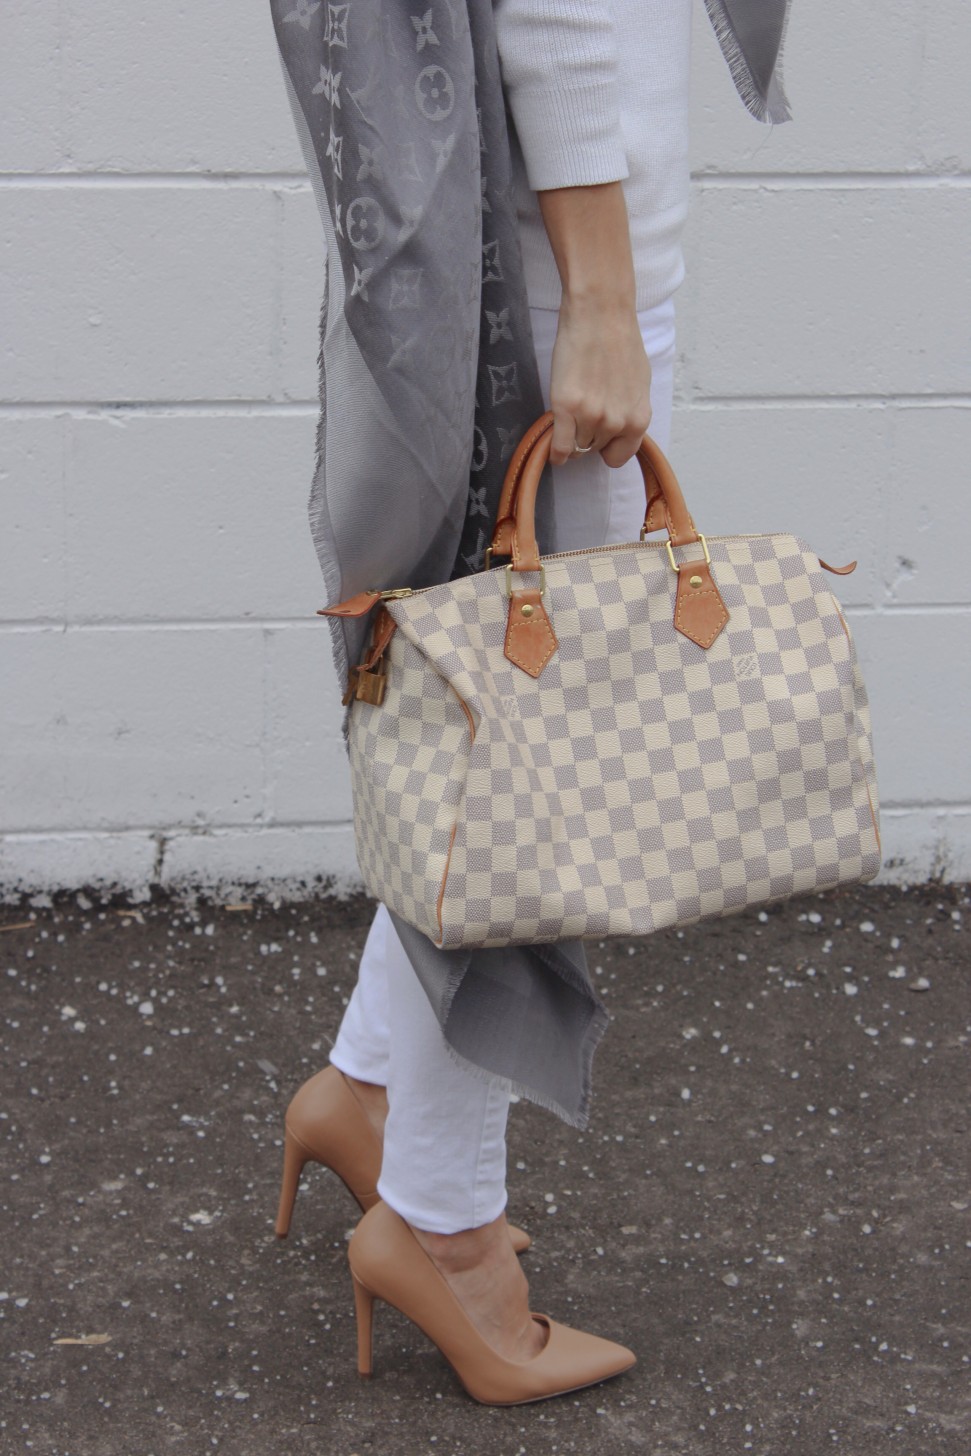 Winter White and Grey + Why I Try to Buy Classic Accessories